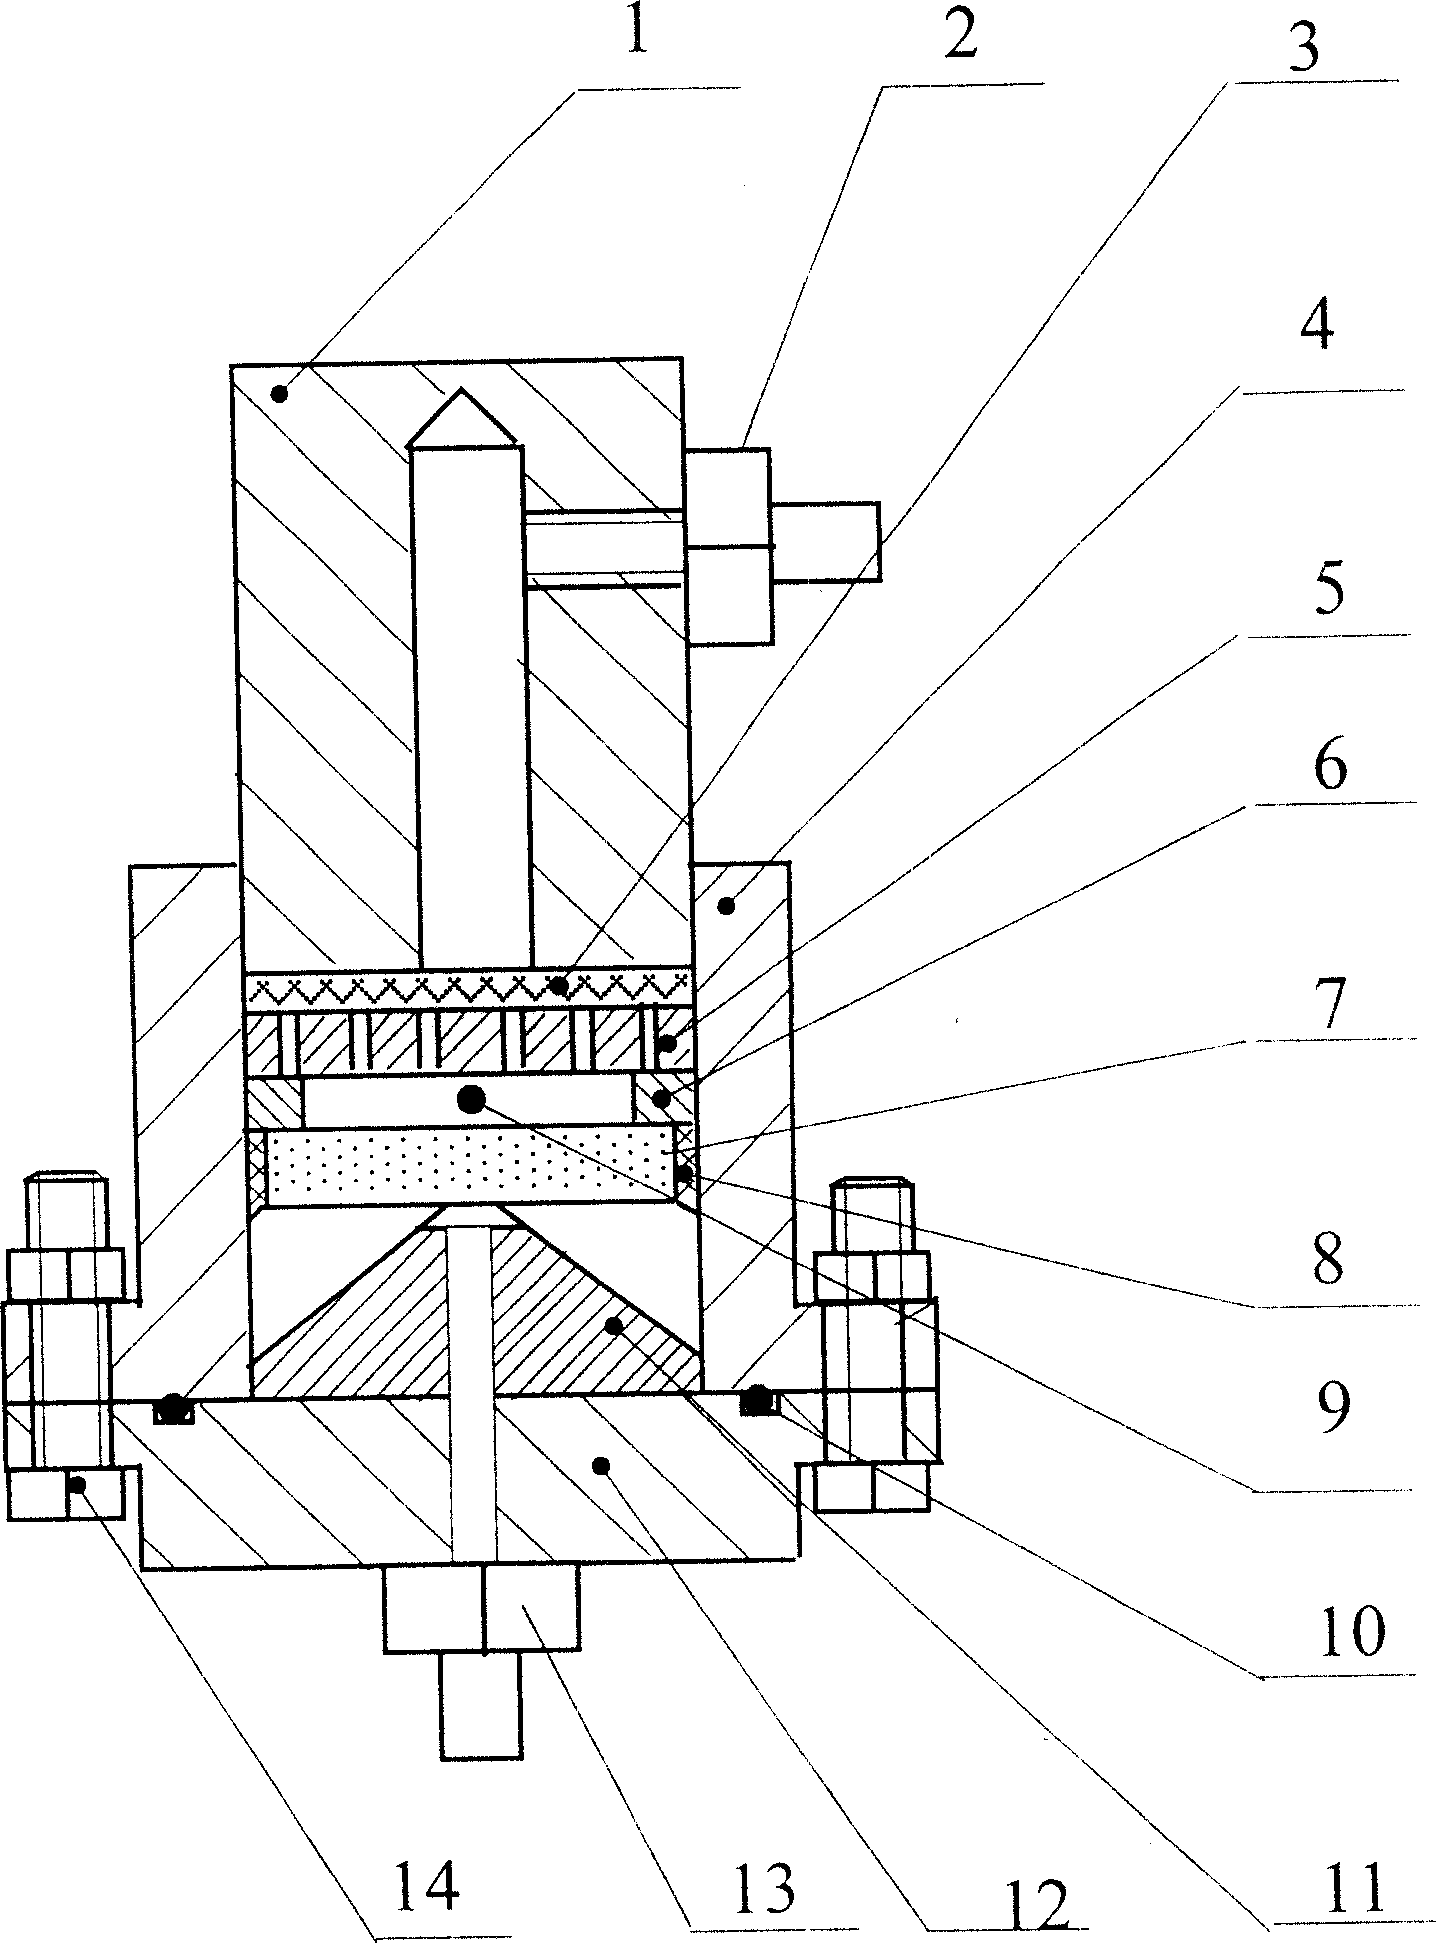 Curved rock sample permeability test device